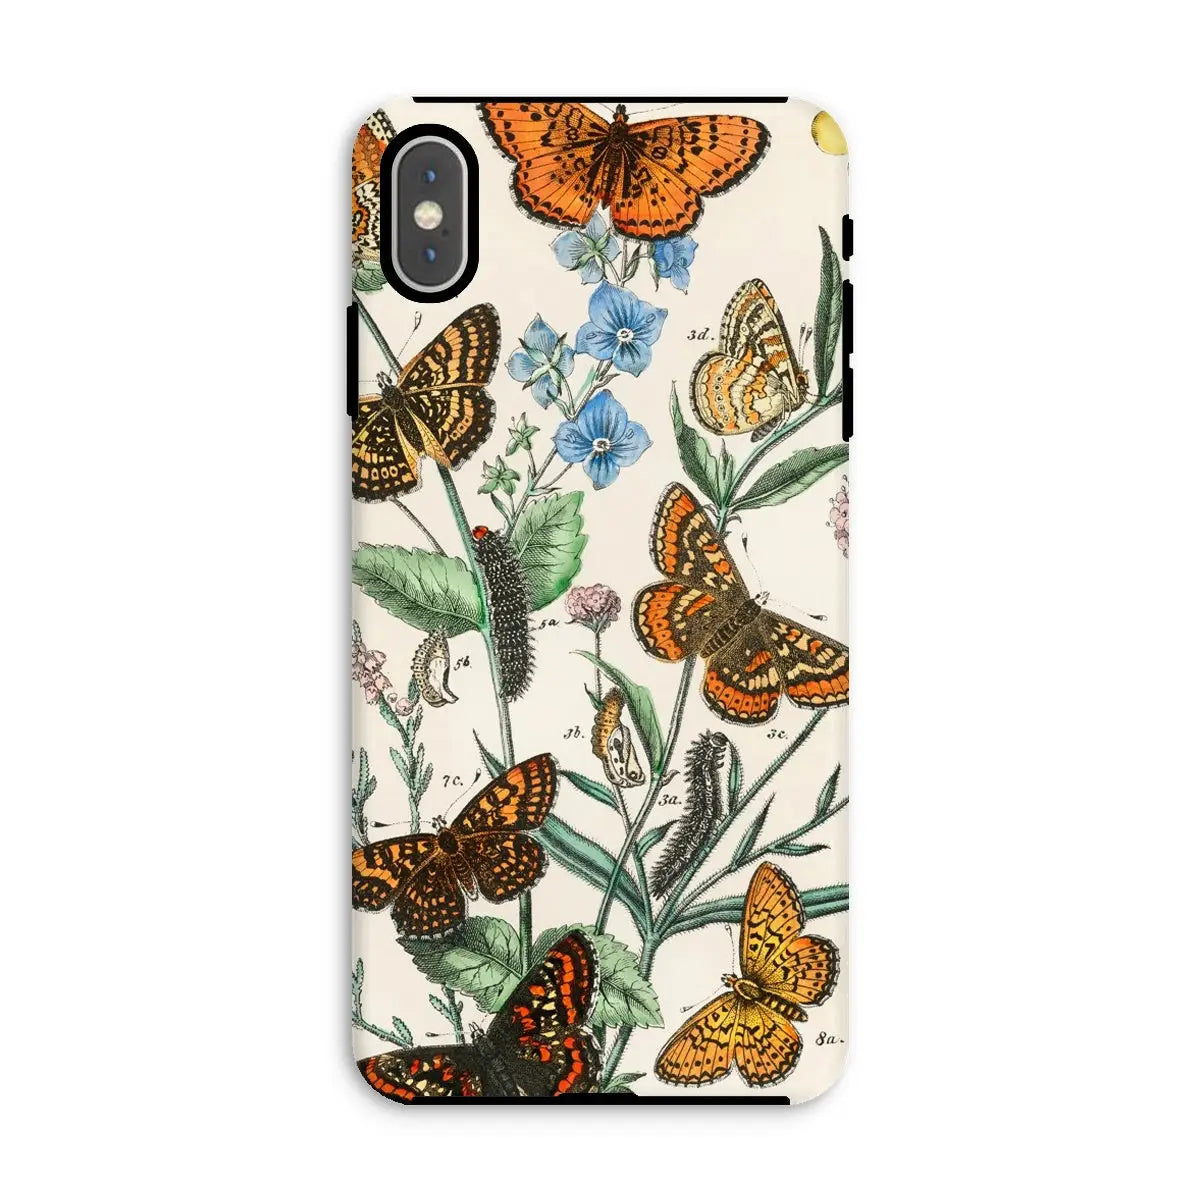 European Butterflies And Moths 2 Art Phone Case - William Forsell Kirby - Iphone Xs Max / Matte - Mobile Phone Cases